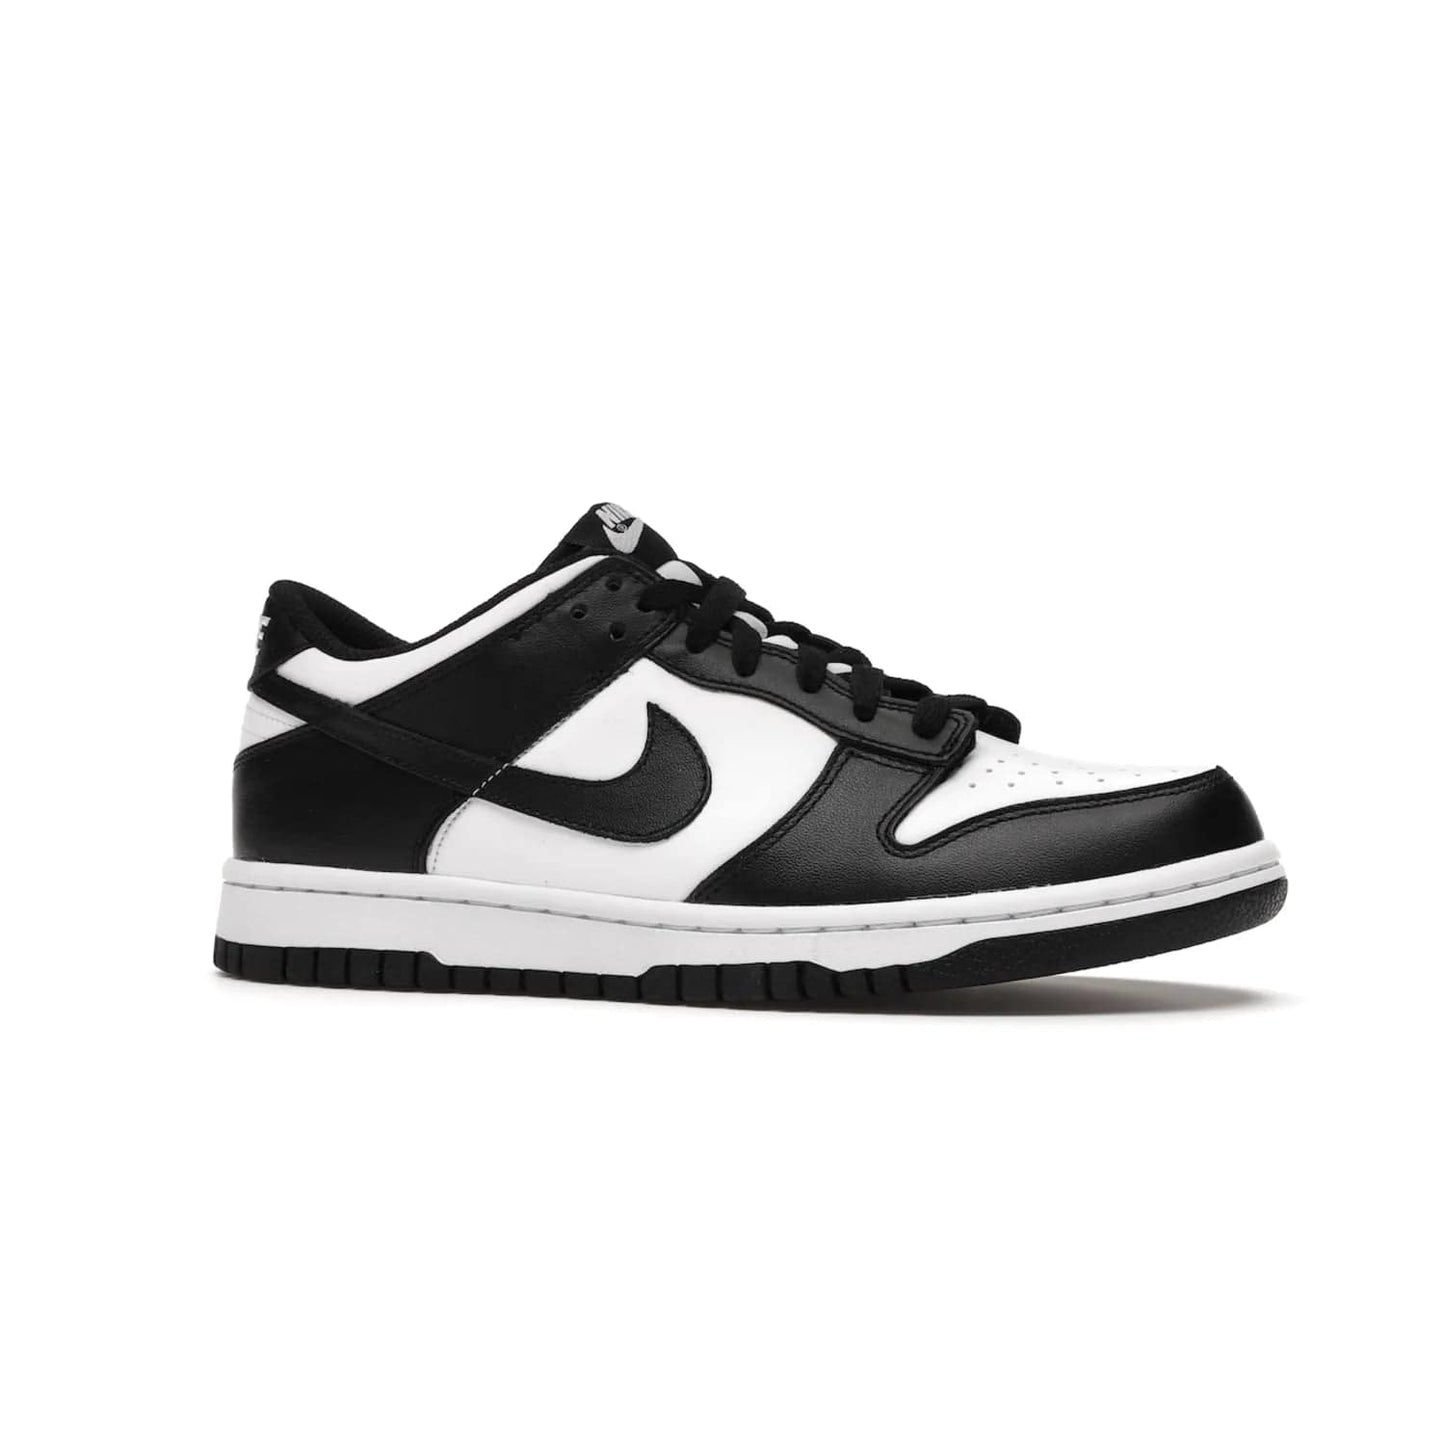 Nike Dunk Low Retro White Black Panda (2021) (GS) - Image 3 - Only at www.BallersClubKickz.com - Upgrade your style with the Nike Dunk Low Retro White Black (GS). Featuring premium leather, iconic Nike text, signature Swoosh logo and striking black/white colorway, this striking silhouette is the perfect mix of style and comfort. Colorway released in March 2021.